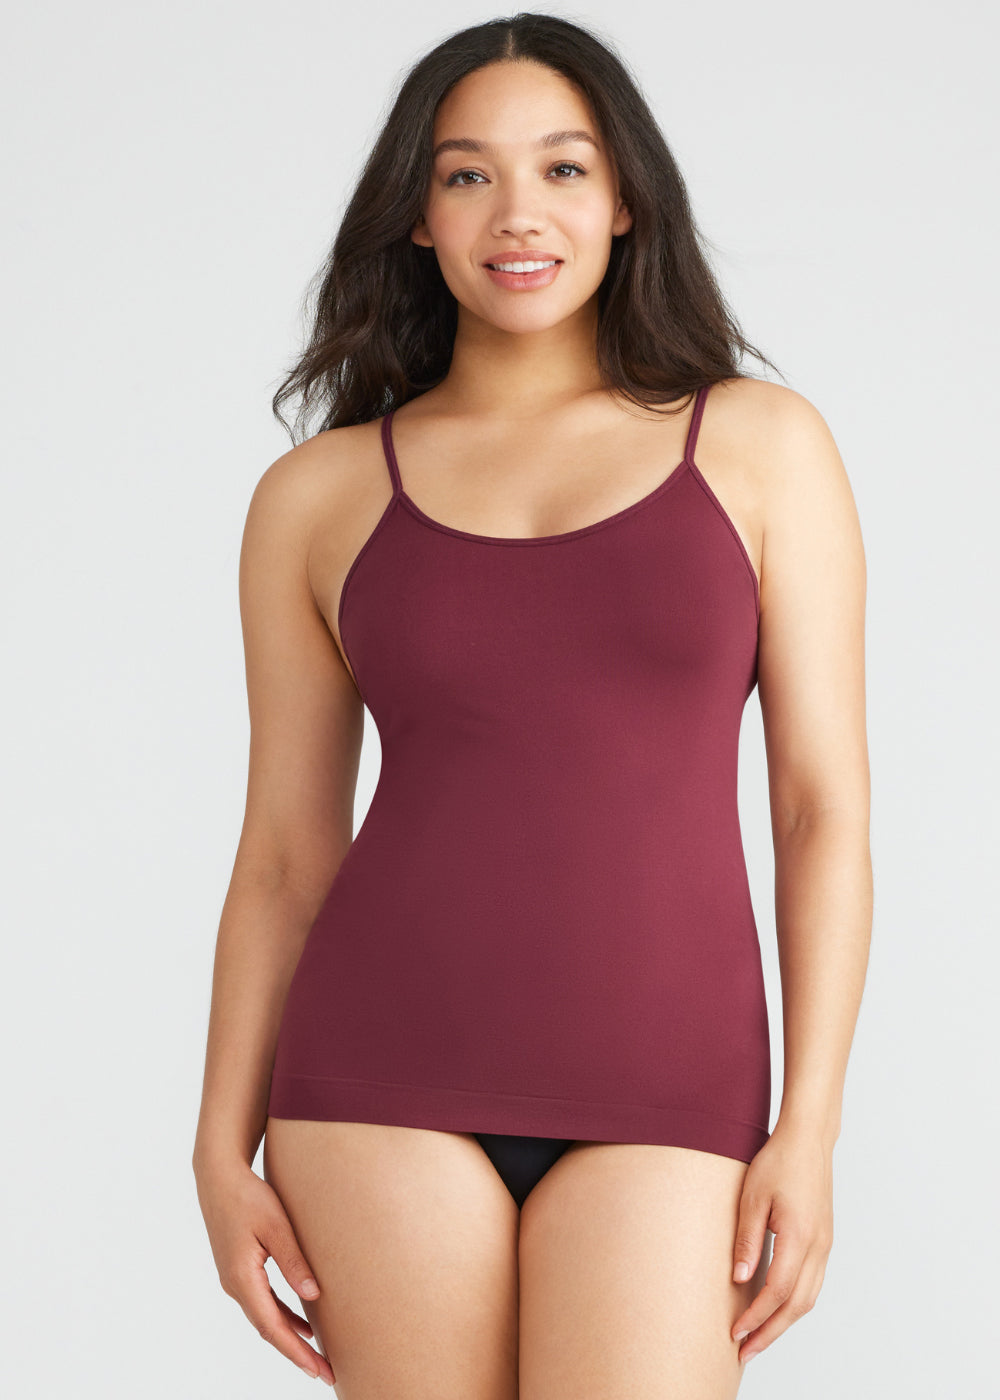 Non-Shaping Camisole - Seamless from Yummie in Windsor Wine  - 1